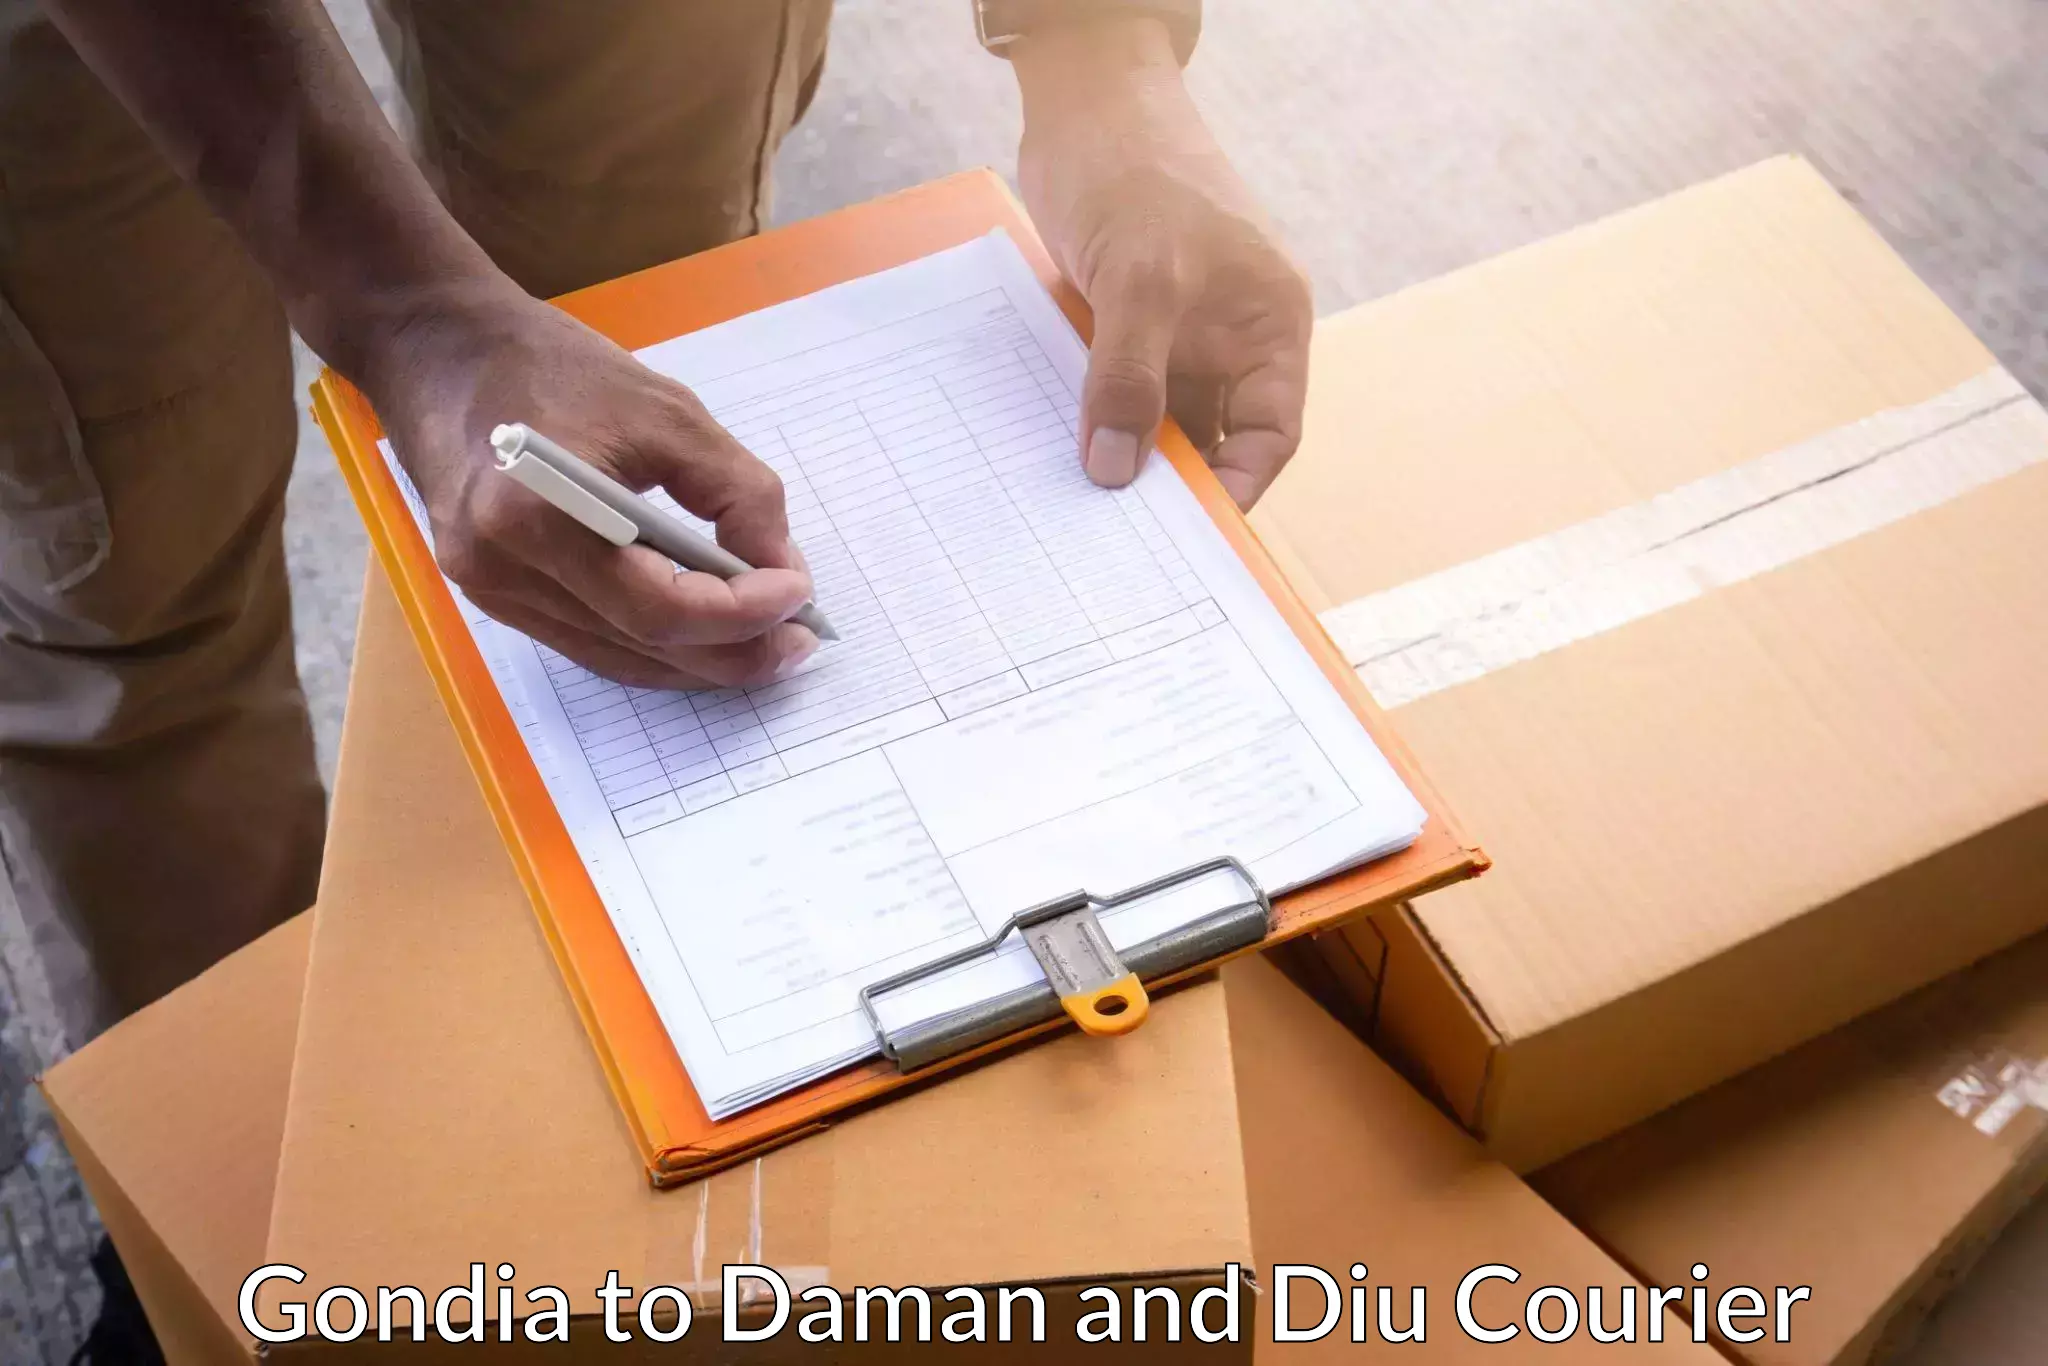 Reliable logistics providers Gondia to Daman and Diu